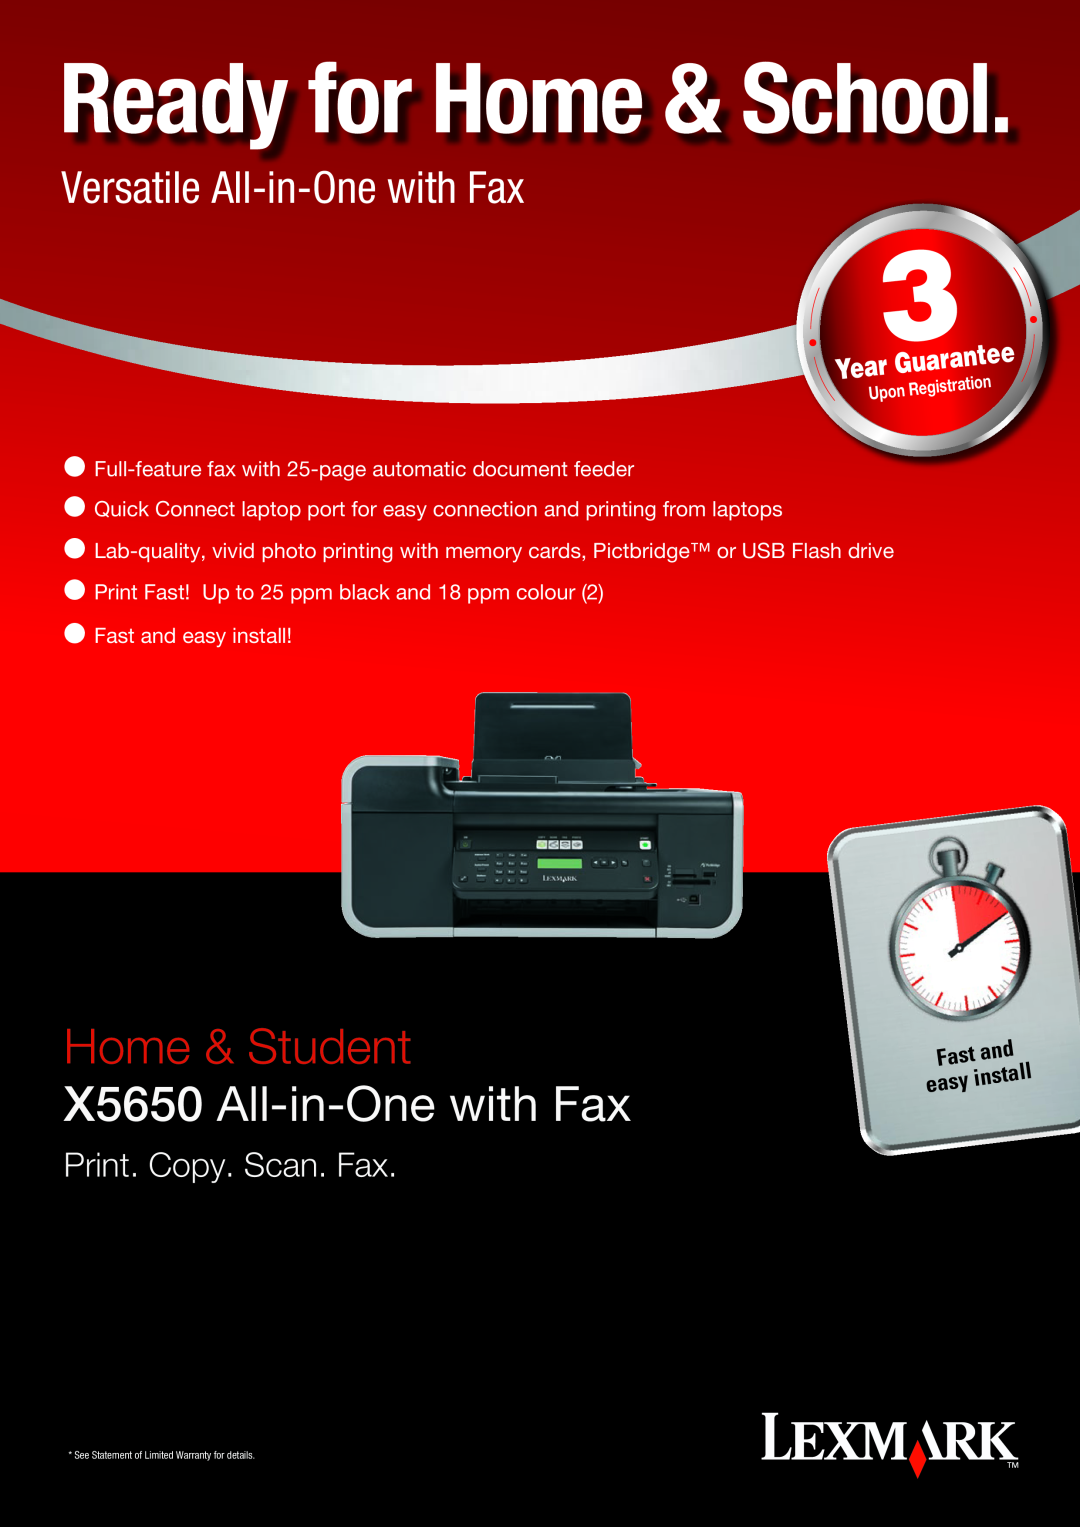 Lexmark warranty Ready for Home & School, Home & Student, X5650 All-in-One with Fax, Versatile All-in-One with Fax 